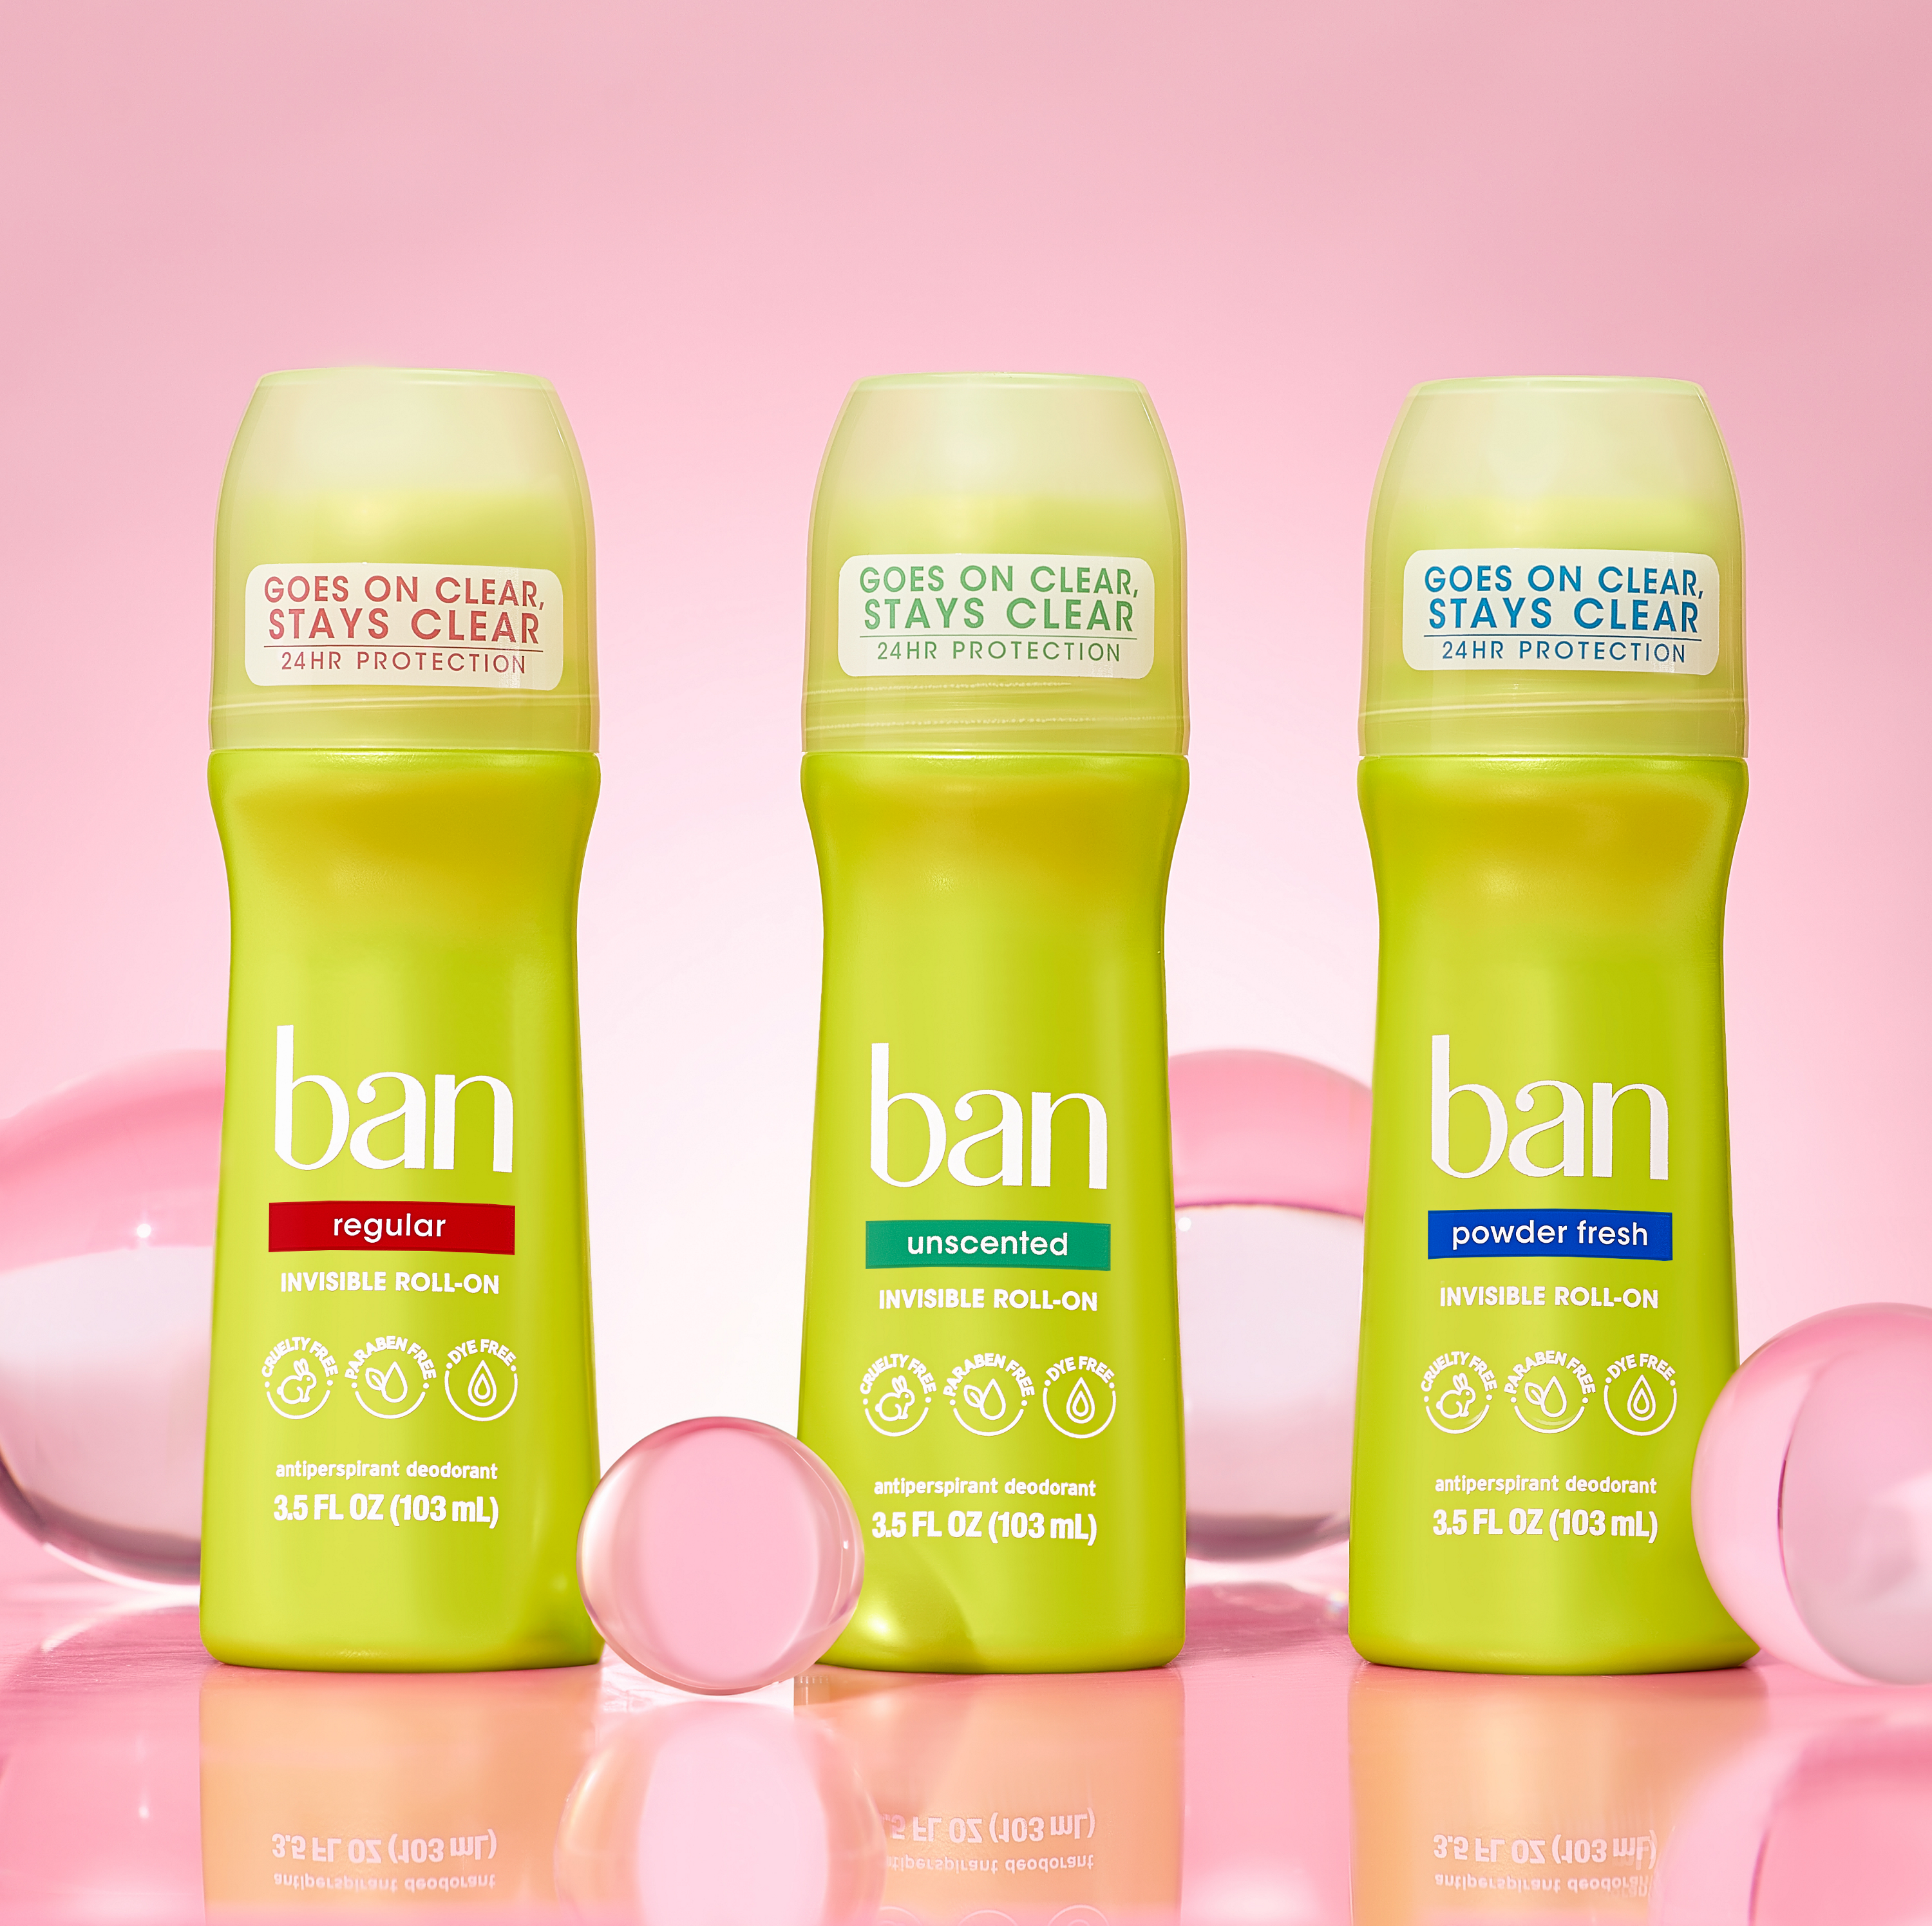 Pink image with clear balls including Three distinct Ban Antiperspirant Roll-On Deodorants in one bundle pack